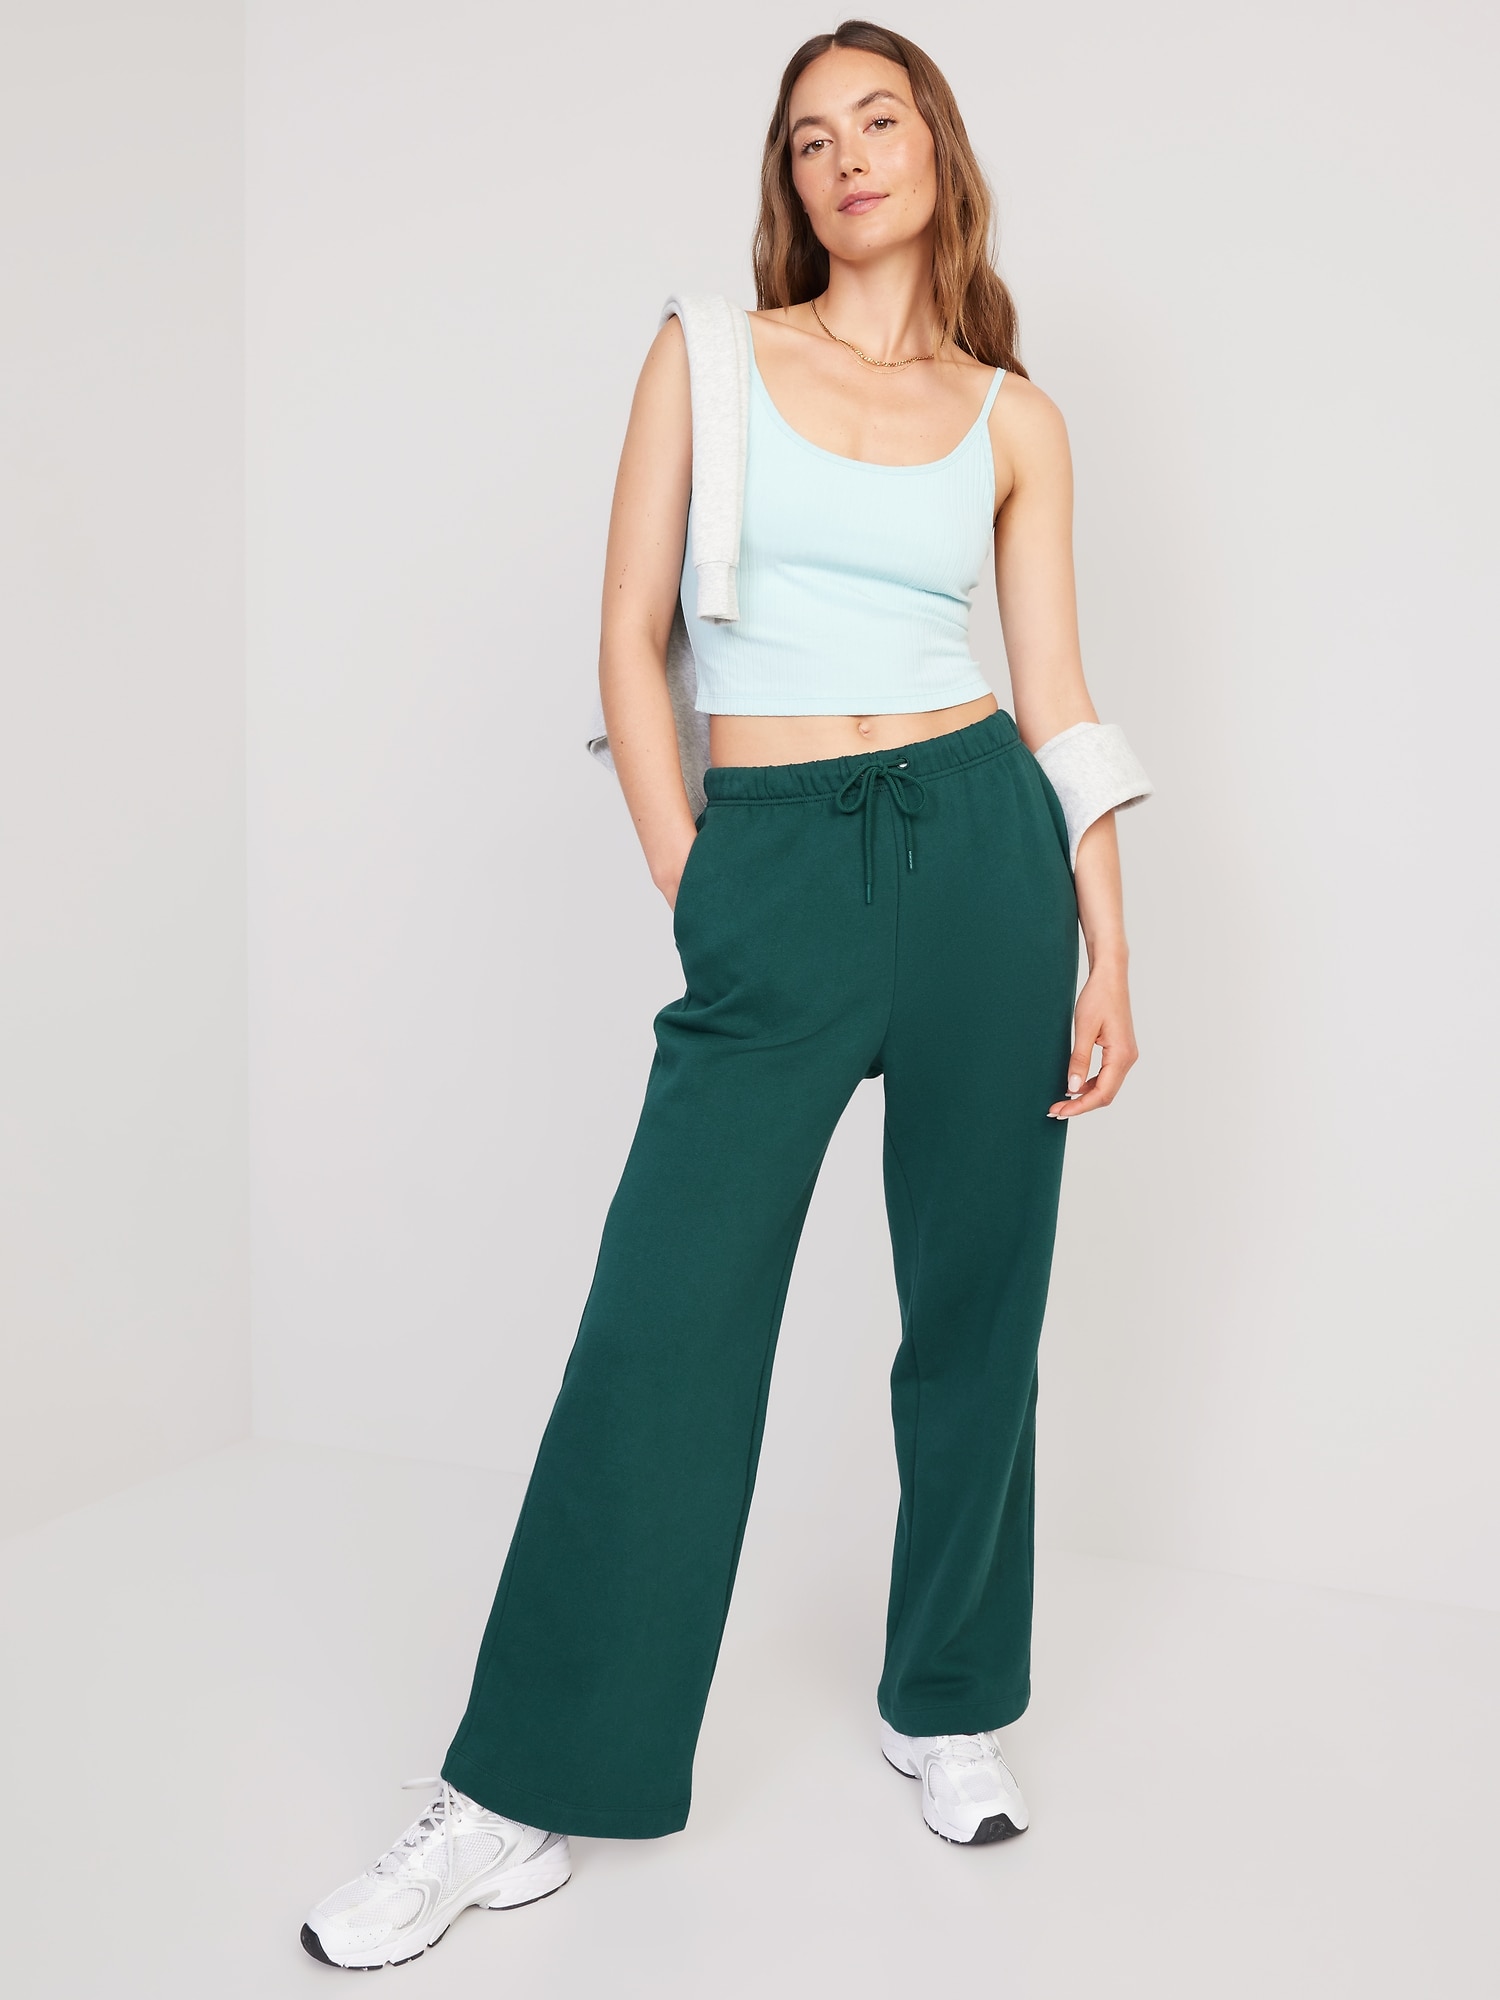 Extra High-Waisted Sweatpants Vintage | Women for Navy Old